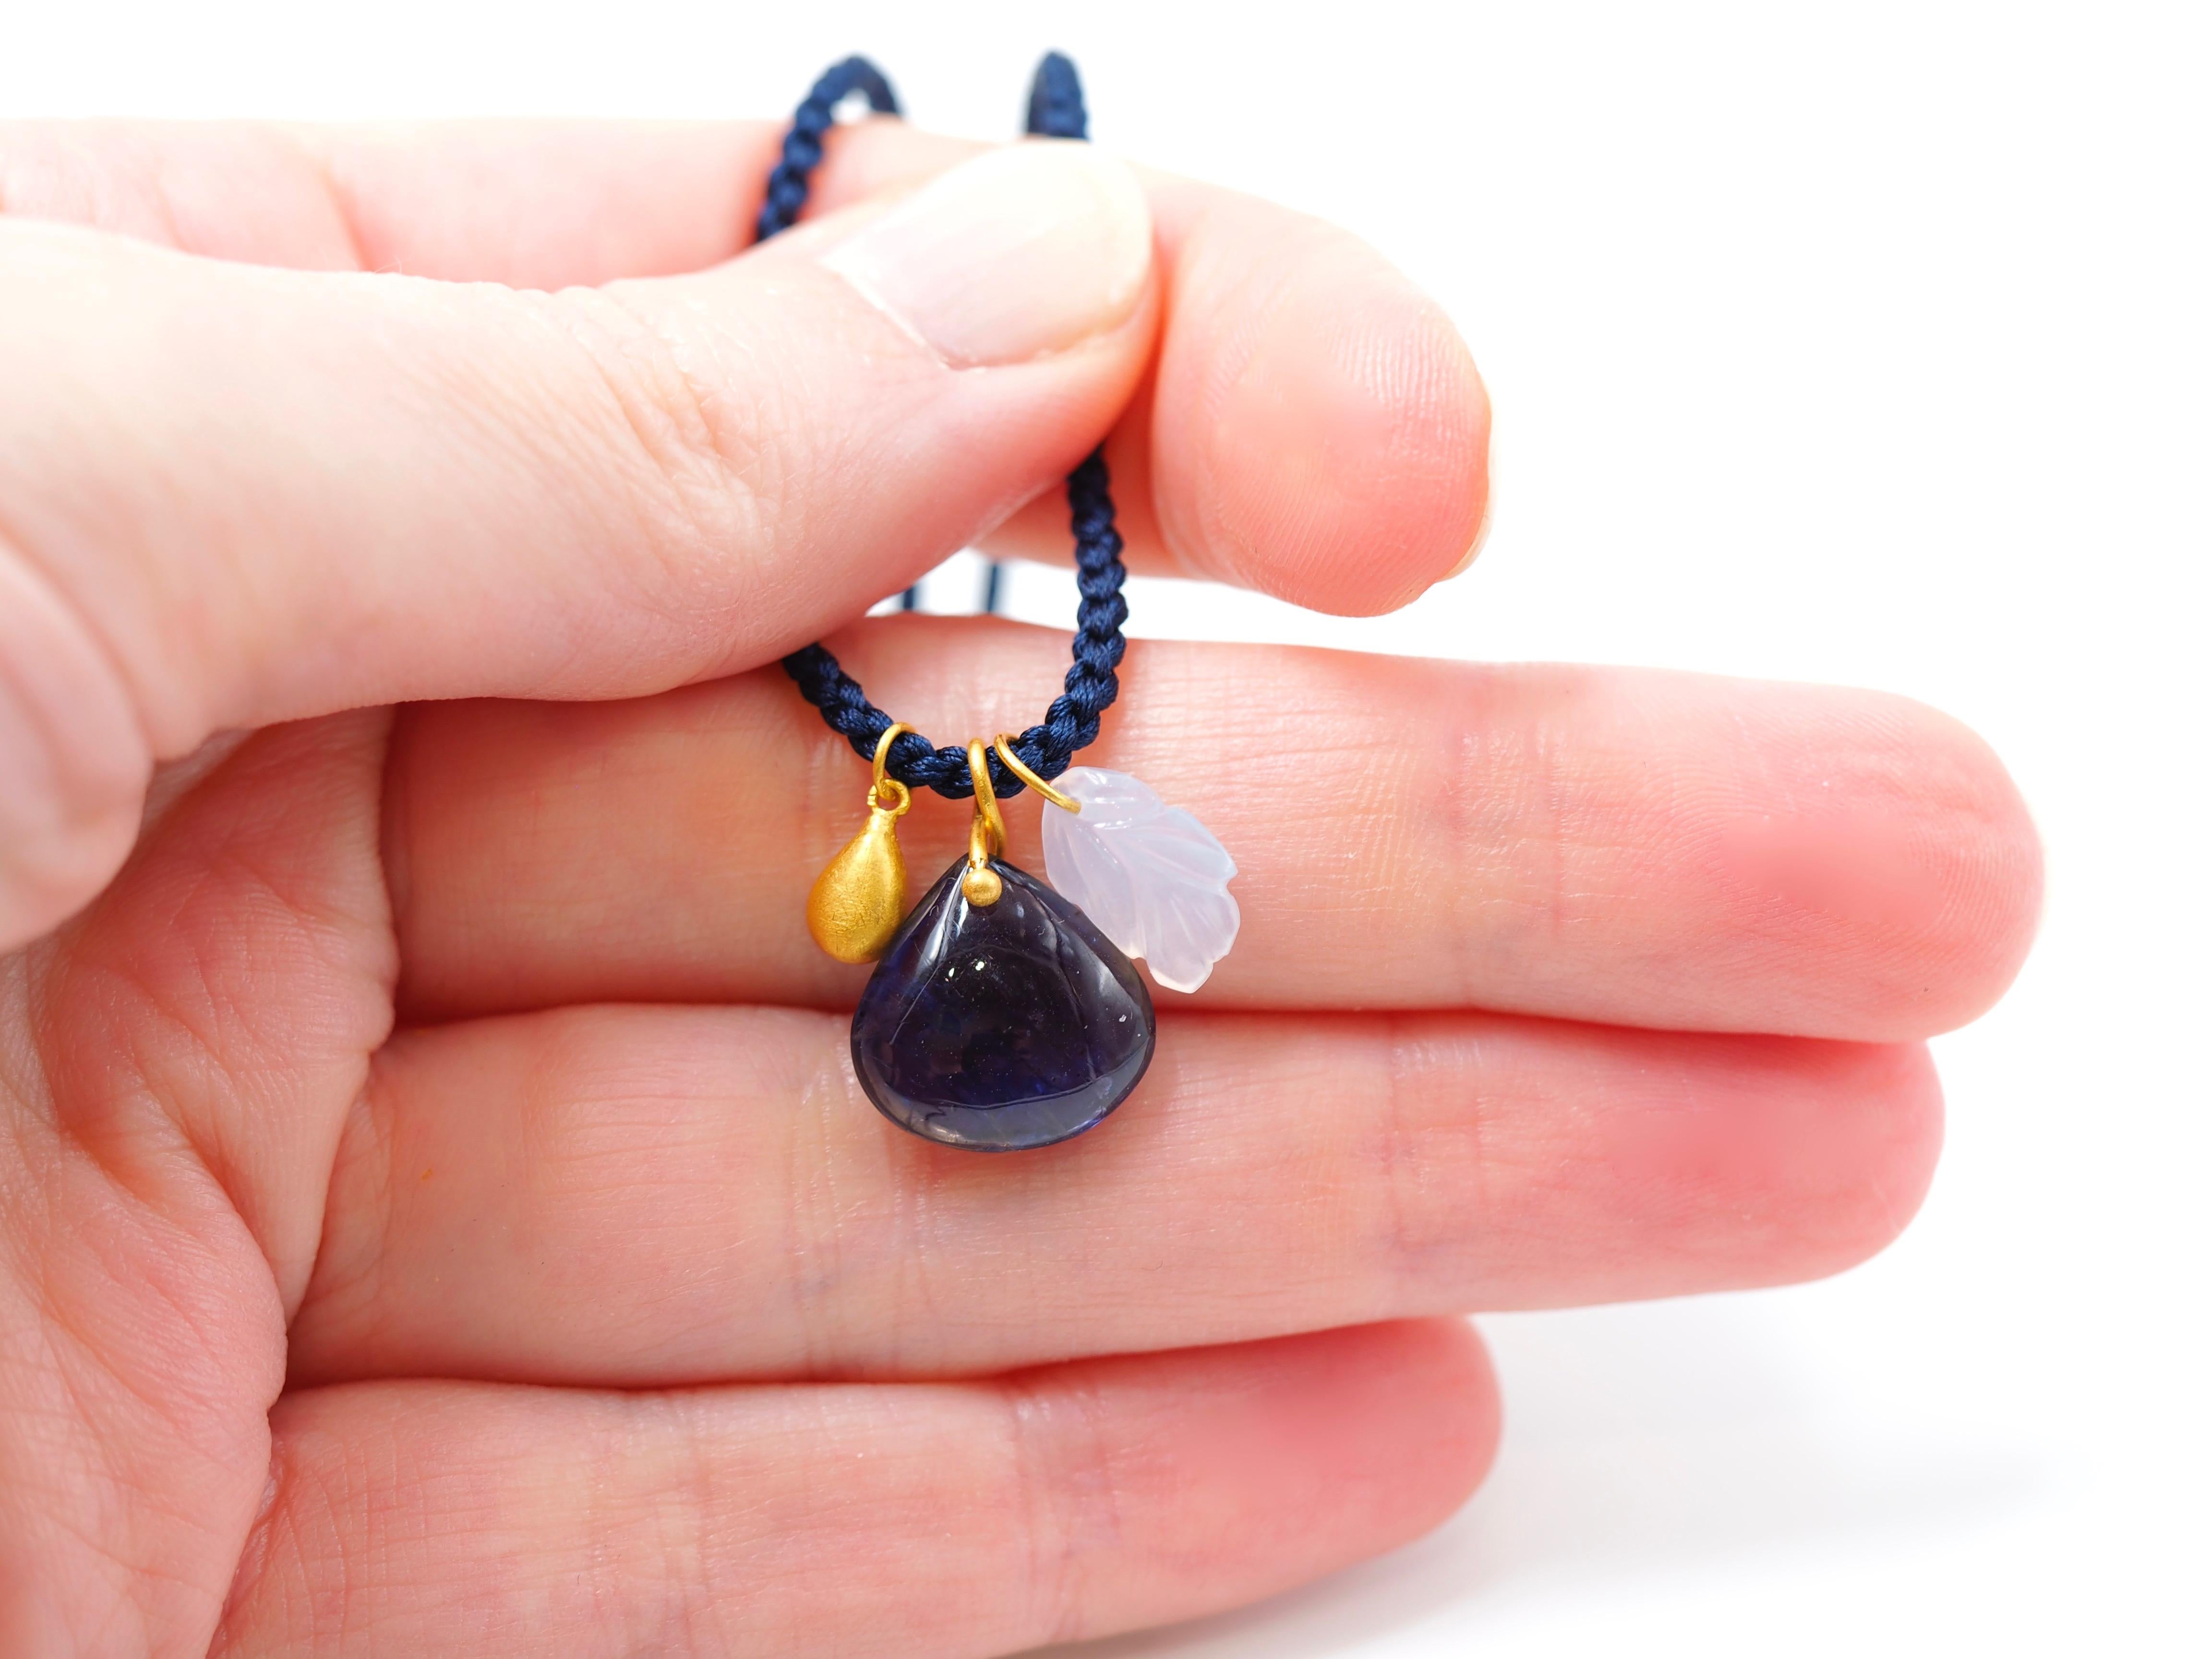 This delicate necklace is composed of 3 pendants on a long braided silk rope:
- a iolite cabochon with a twisted gold ring
- a 22kt gold drop
- a blue chalcedony leaf
All stones have been hand-cut, hand-faceted and handmade by our skilled